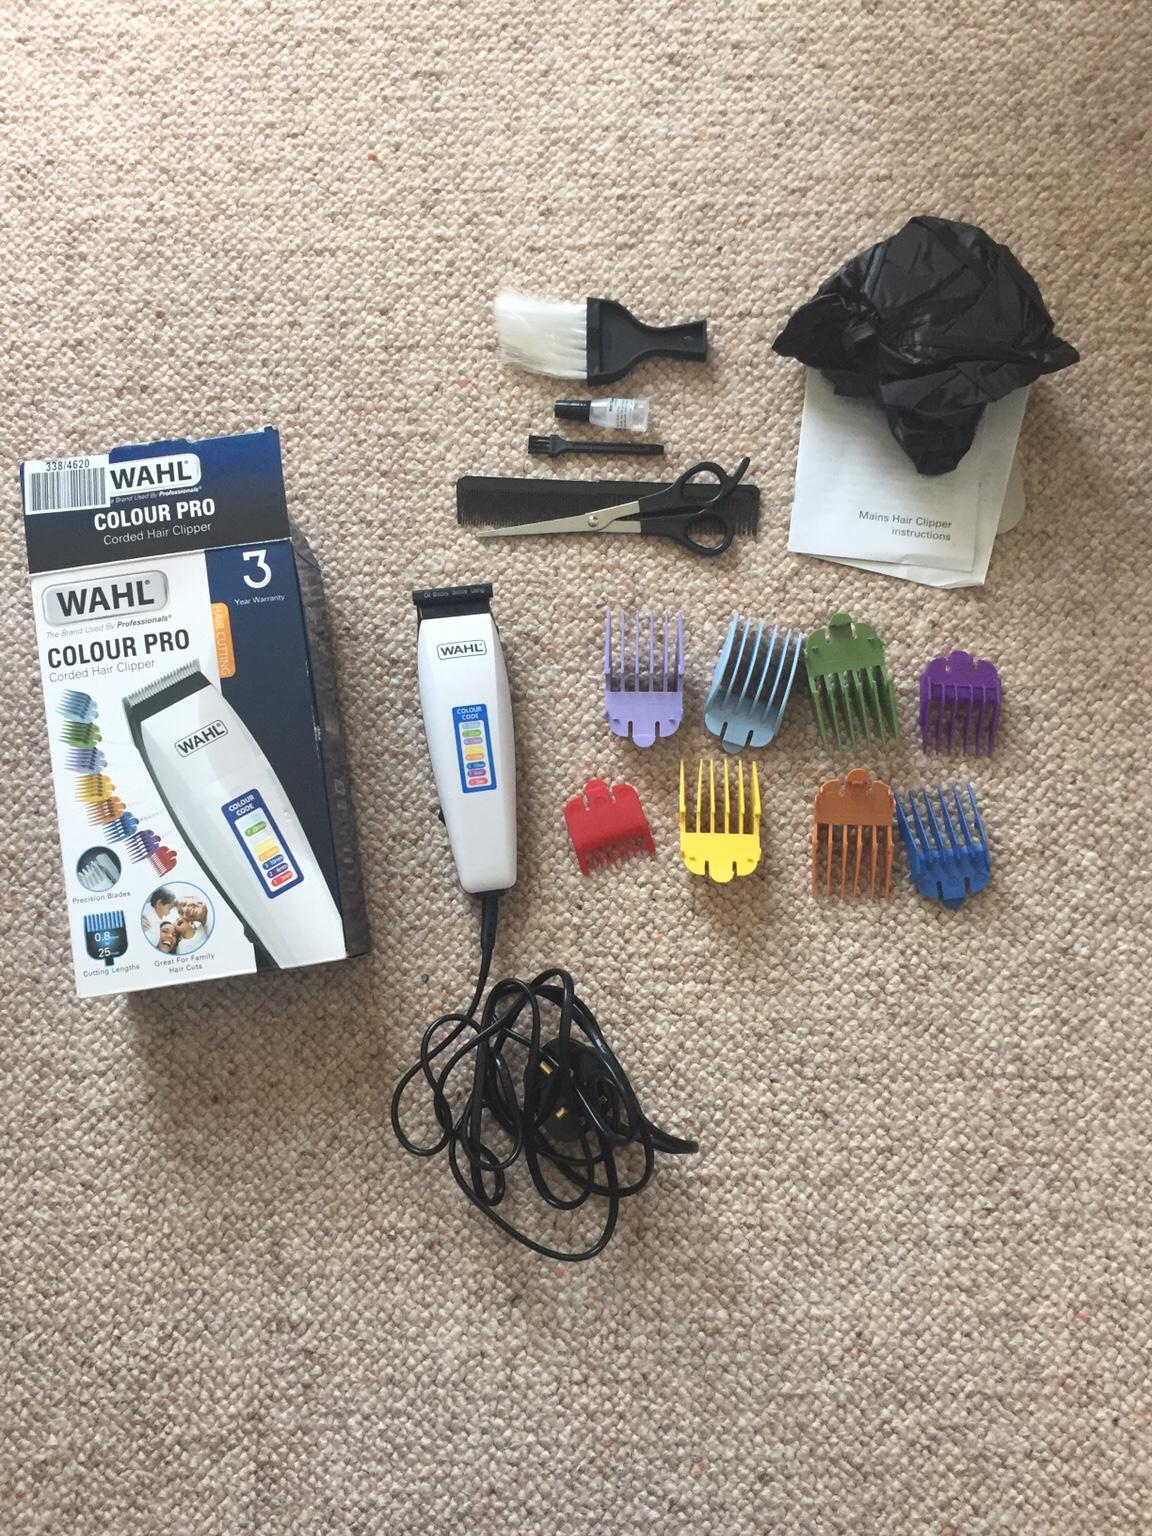 wahl colour cordless hair clippers